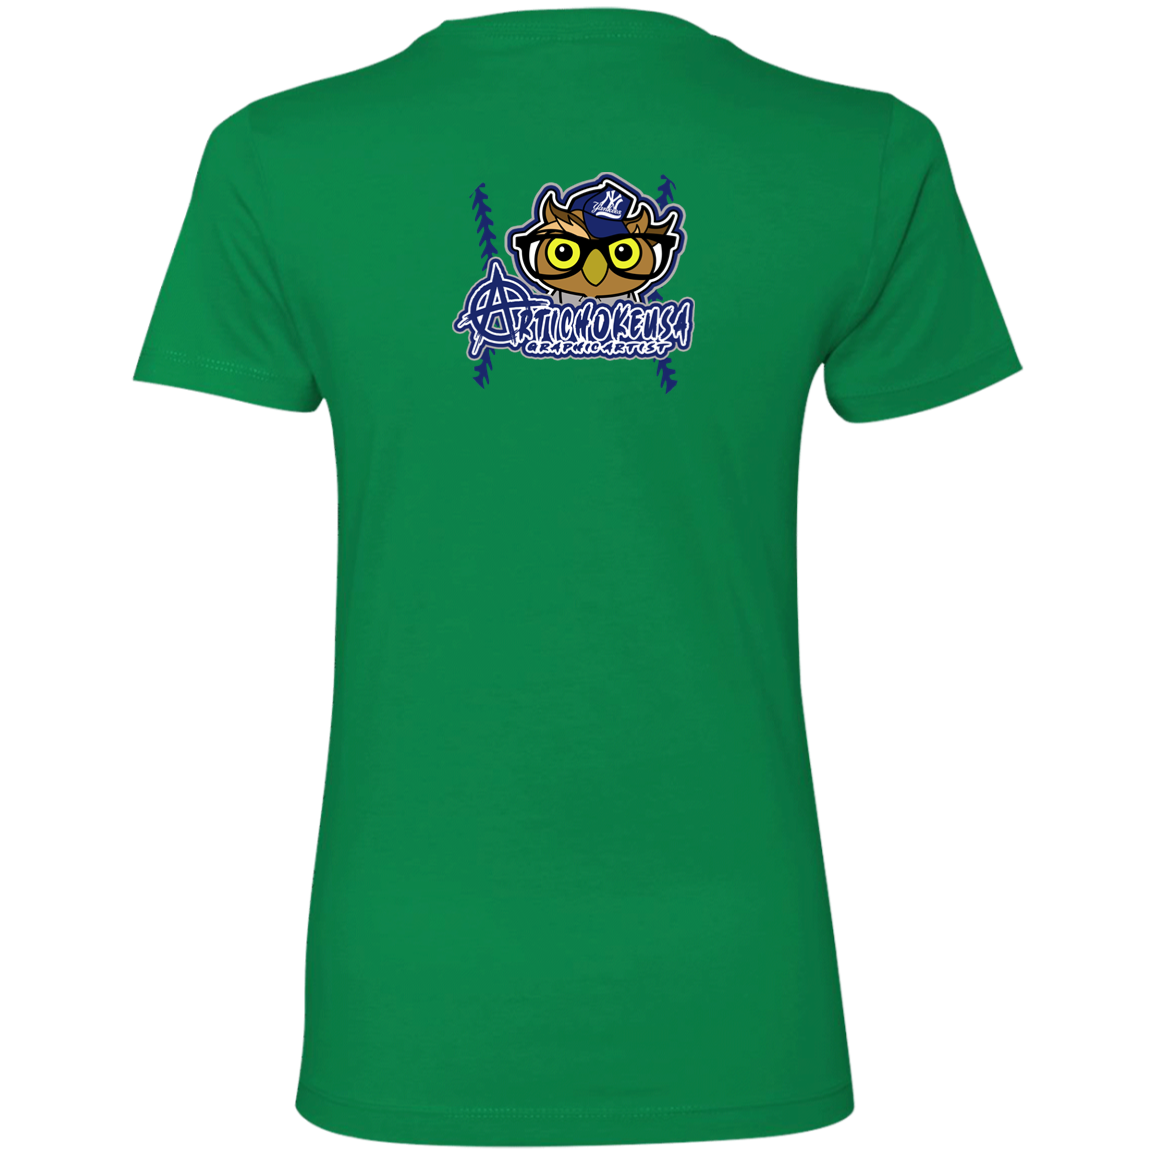 ArtichokeUSA Character and Font design. New York Owl. NY Yankees Fan Art. Let's Create Your Own Team Design Today. Ladies' Boyfriend T-Shirt